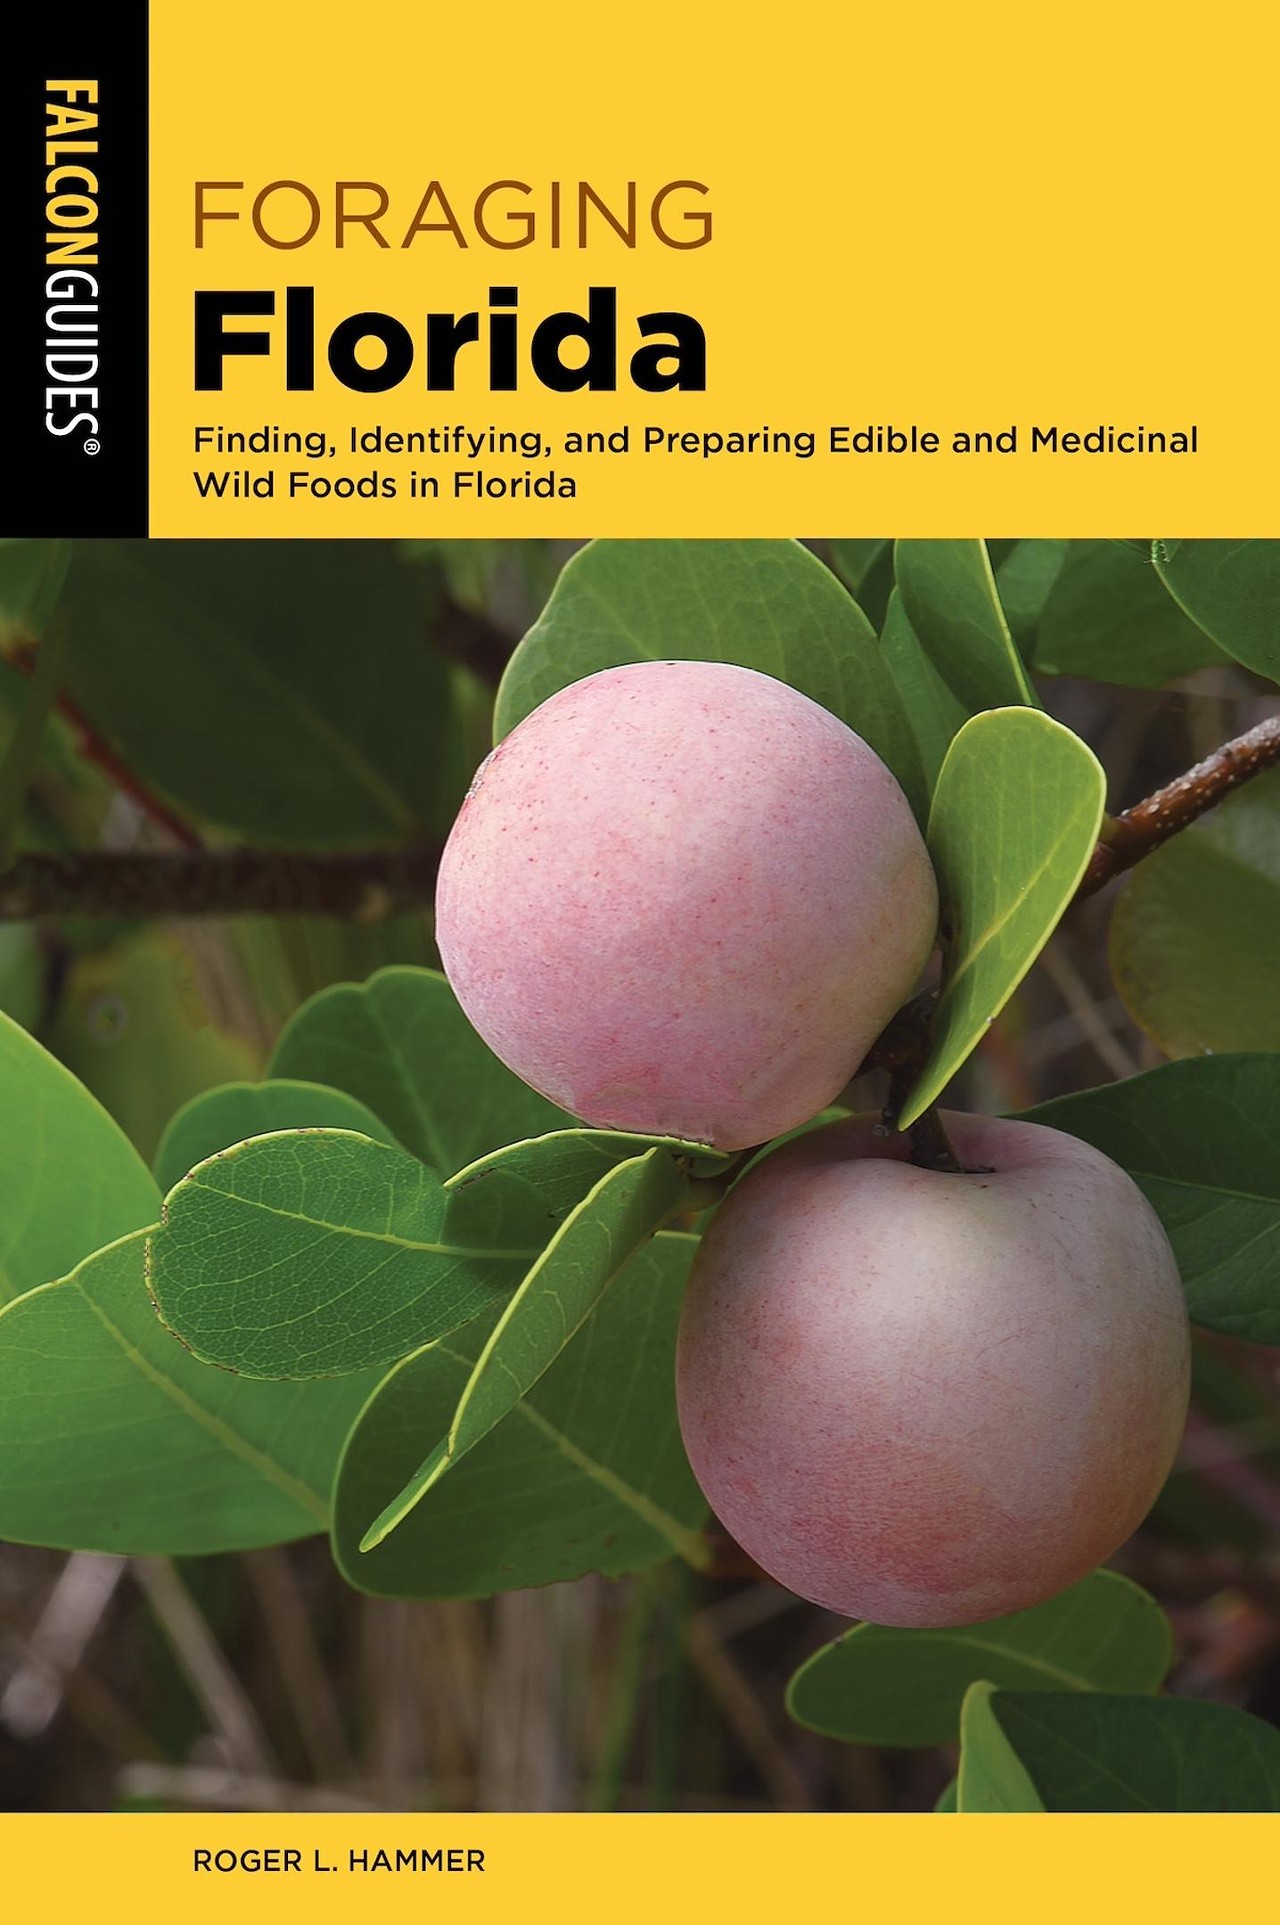 ‘Foraging Florida: Finding, Identifying and Preparing Edible and Medicinal Wild Foods in Florida’ By Roger L. Hammer
A guide for any Floridian—Tampeños and St. Petians included—who want a starting point for recreational foraging, and to make sure they go about things legally, ethically, and in a way that honors the generations of Native American land stewards, many of whom discovered these medicines and food preparations several centuries ago. The book opens with a stark disclaimer that unambiguously, and repeatedly, reminds readers that the work is a reference and that there are dangers when it comes to eating collected from the wild. It contains 261 pages of herbs, wild fruits, useful plants that are commonly deemed as weeds, palms, root vegetables and berries that grow in every nook and cranny of the Sunshine State’s unique ecosystem. Some of these edible plants are even common trees or flora you may drive by every day. (Falcon Guides)—Kyla Fields
Photo via Falcon Guides